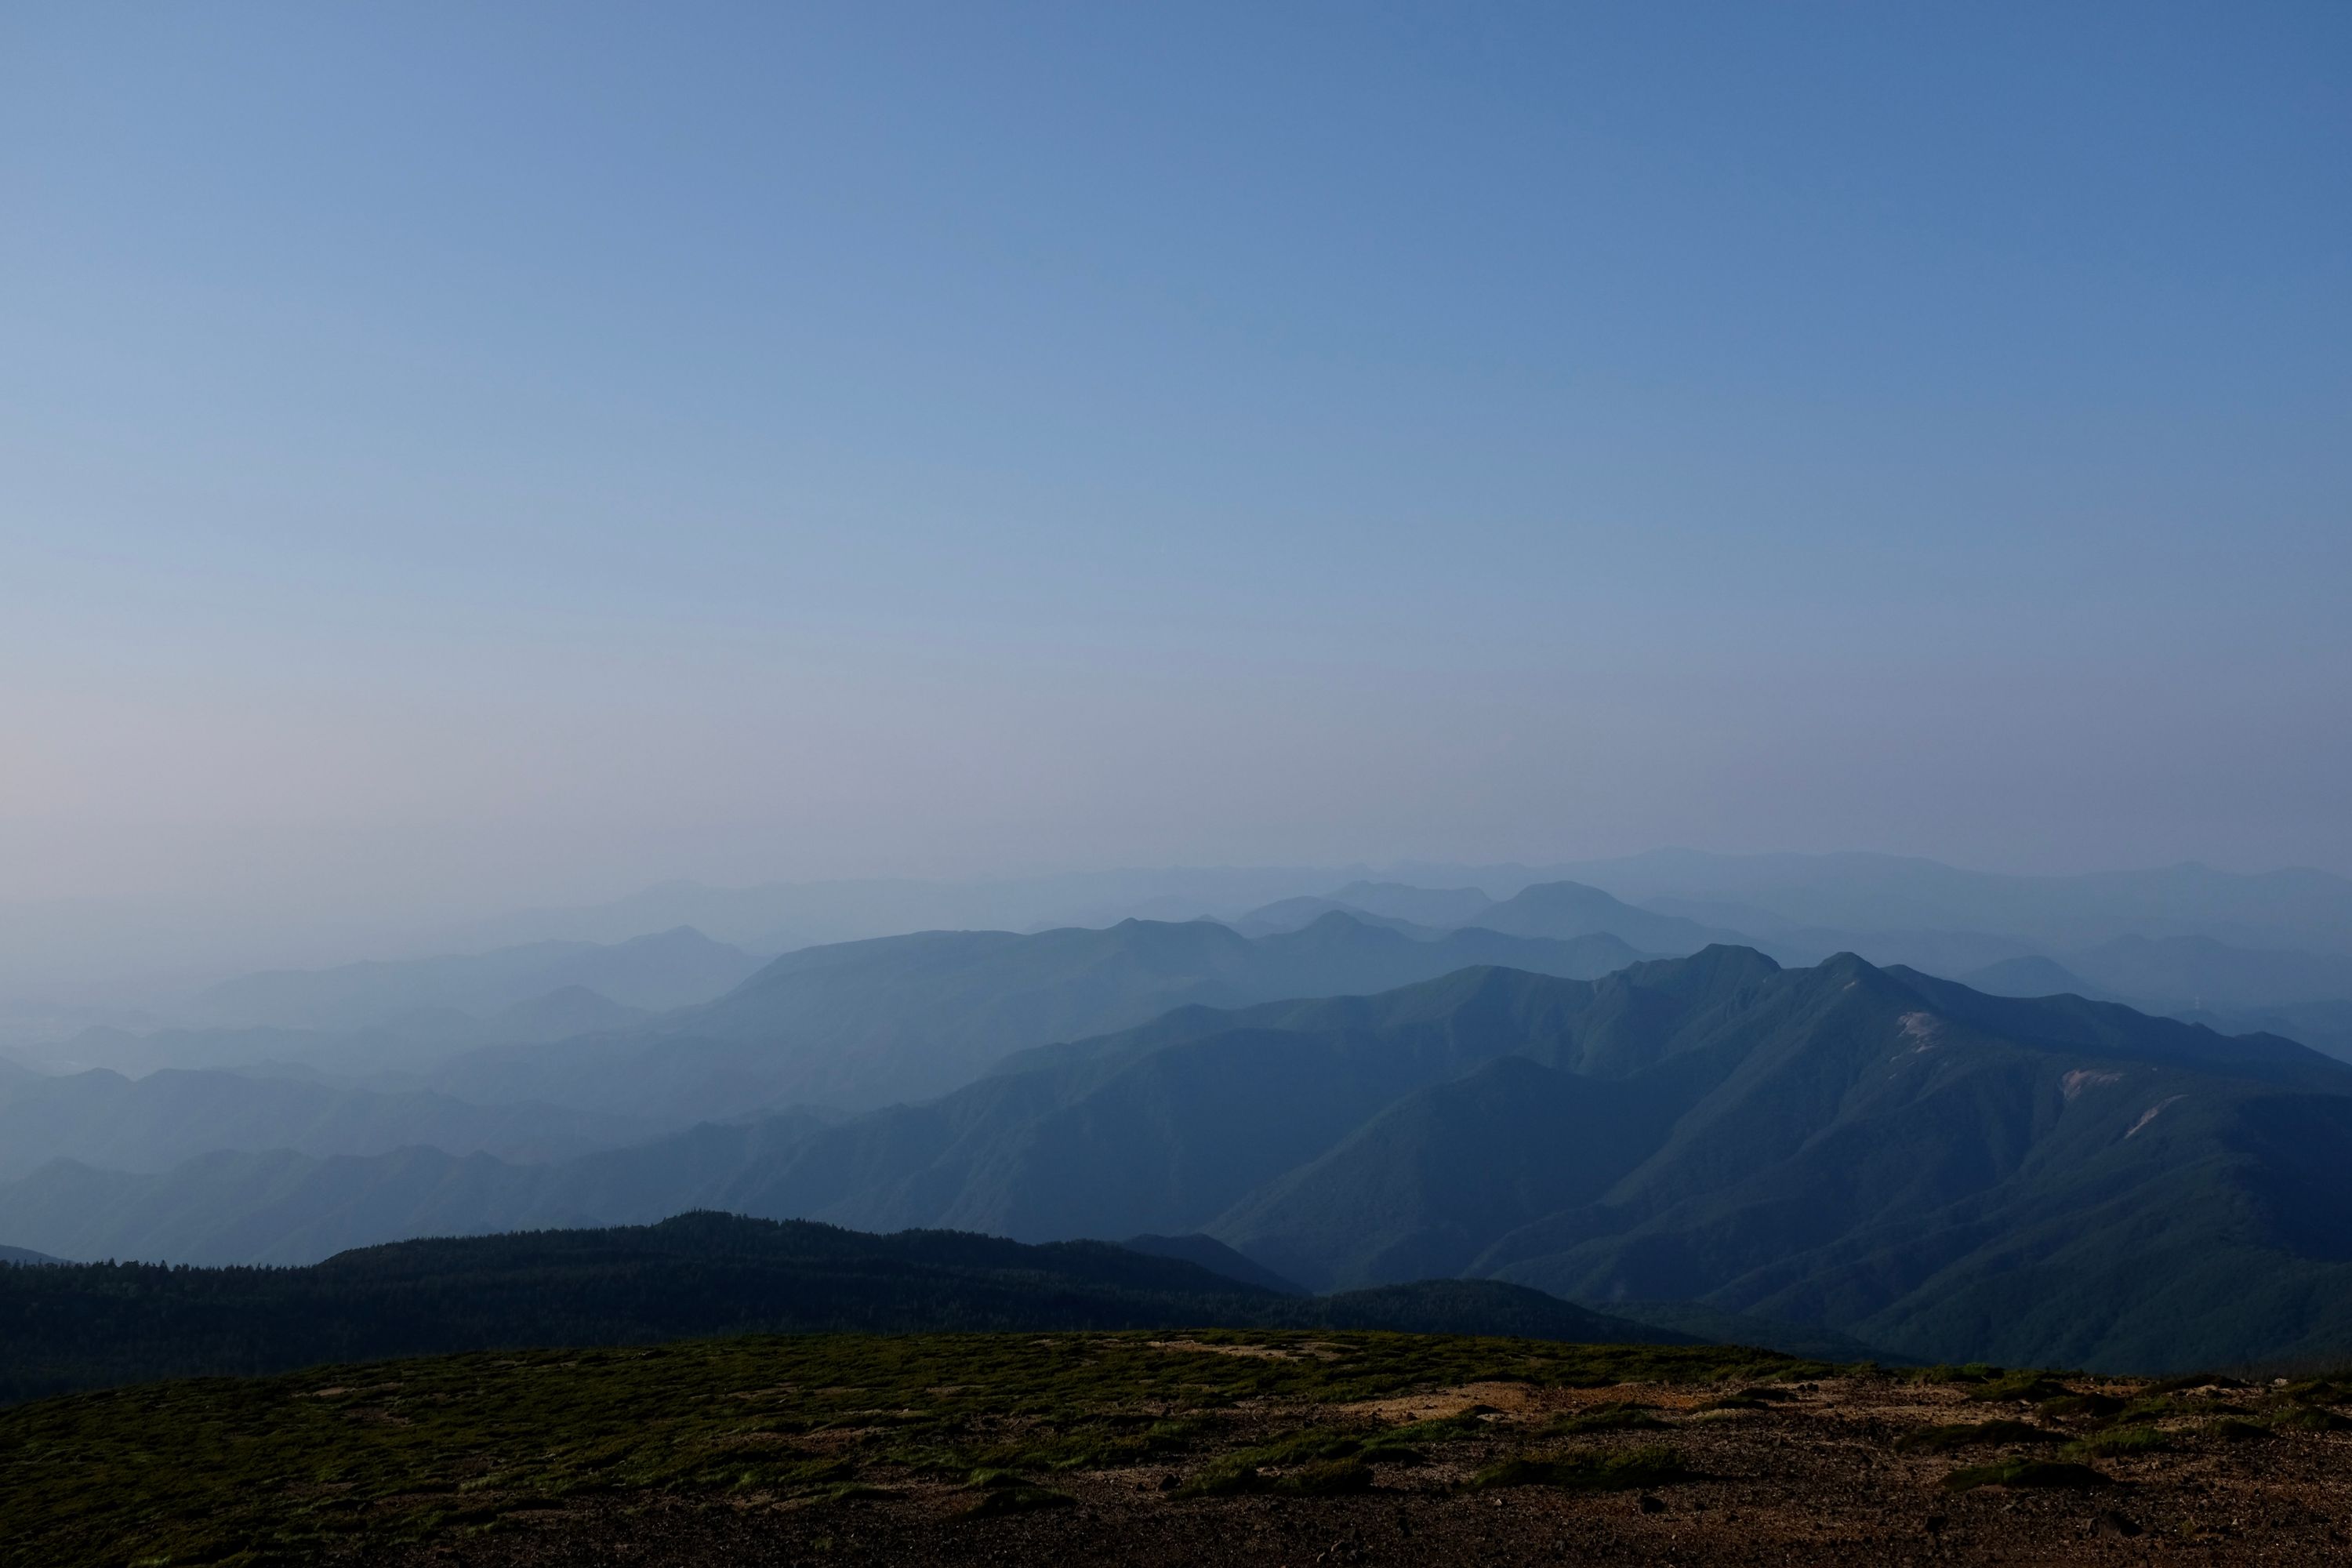 Ranges of low hills fade into the haze, as seen from a mountaintop.